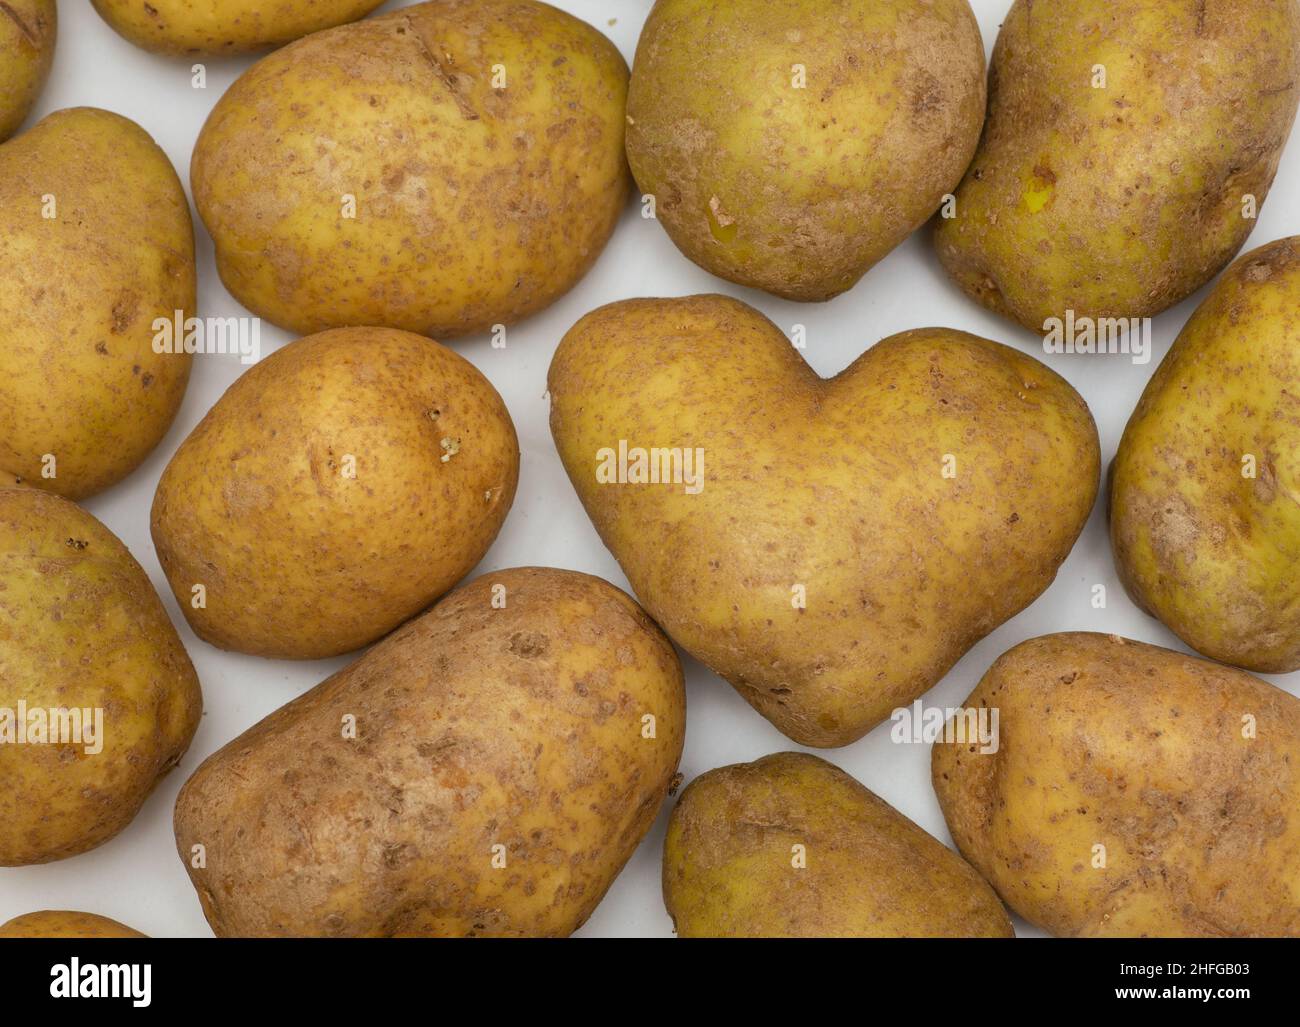 Selection of potatoes on a white background with a heart shape potato amongst the selection. Stock Photo